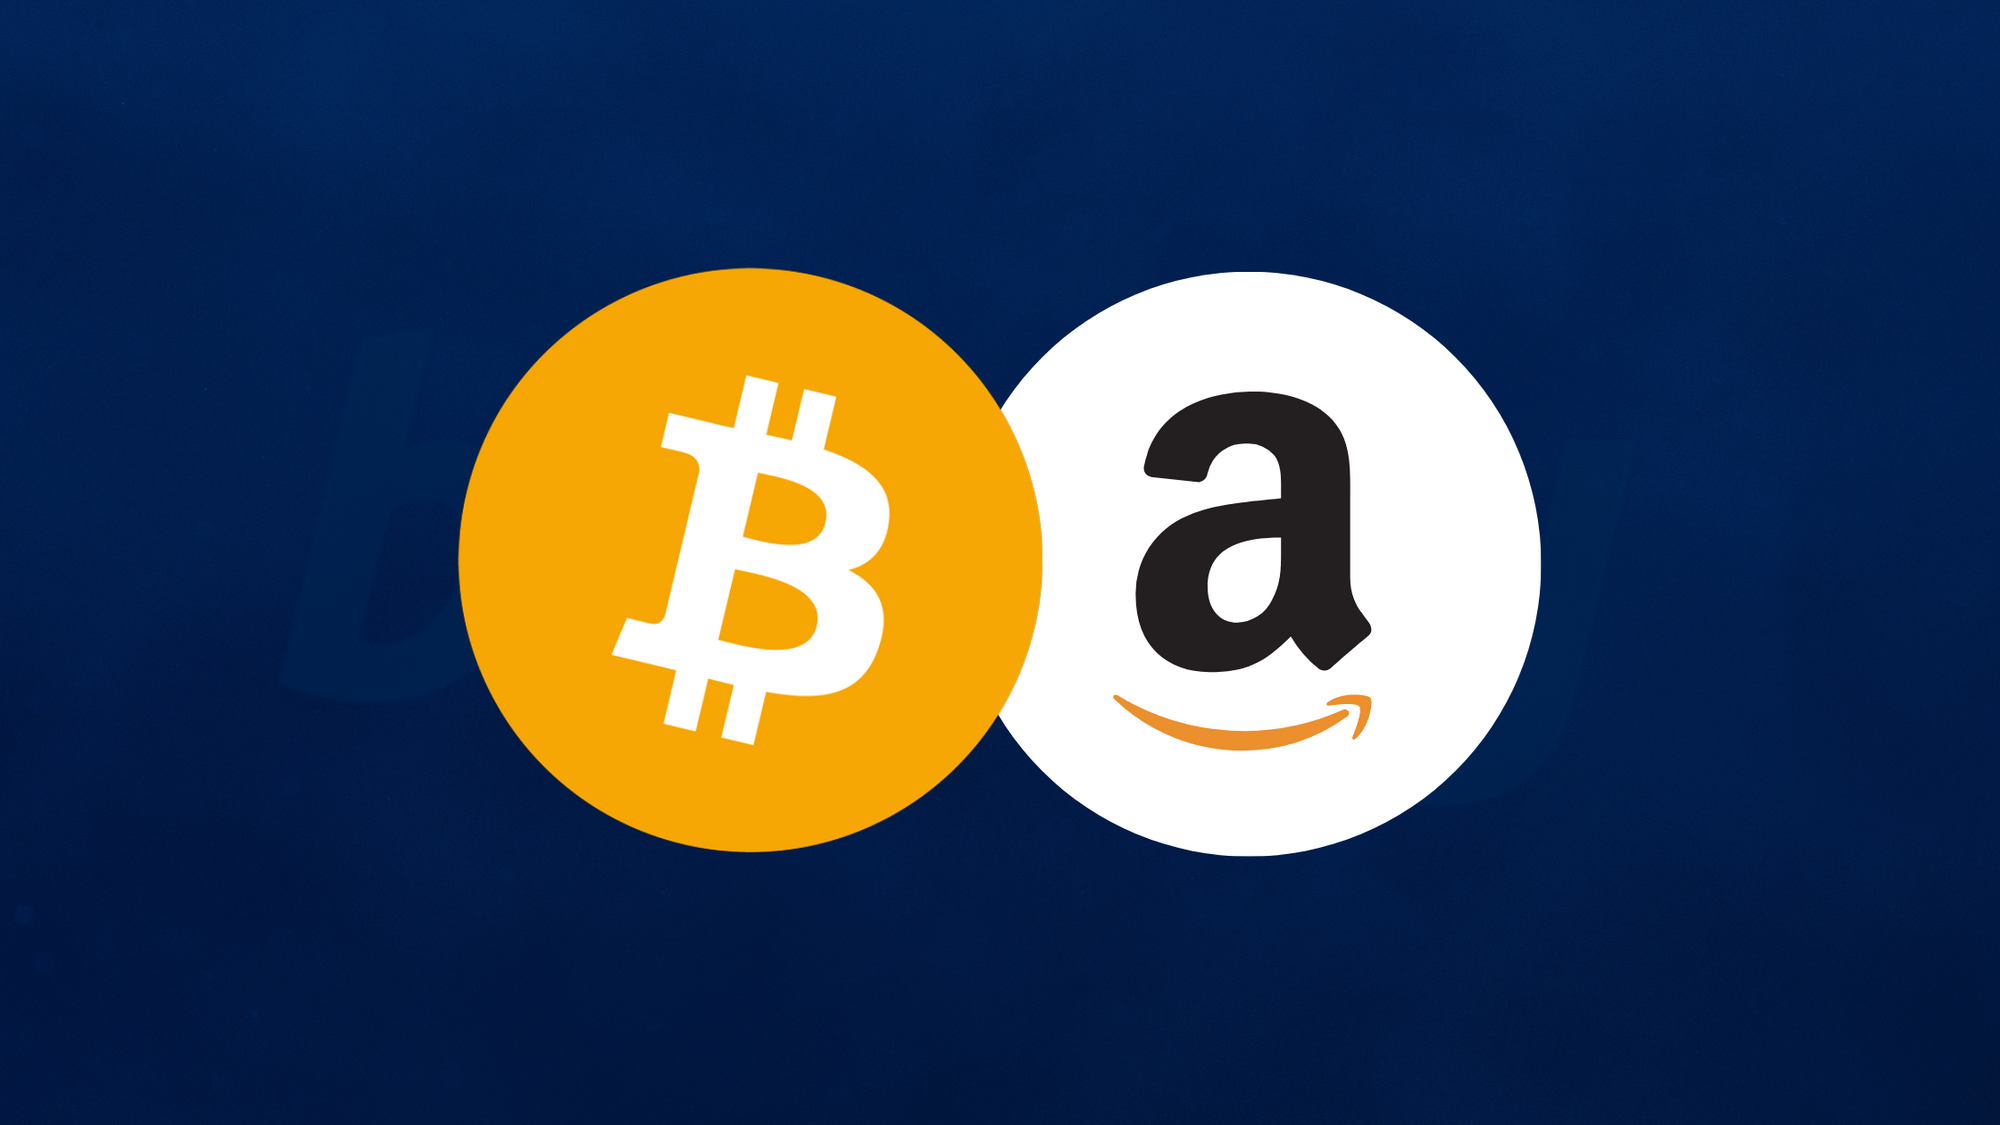 Buy Amazon Gift Cards with Bitcoin, DOGE, Litecoin & other Cryptocurrencies